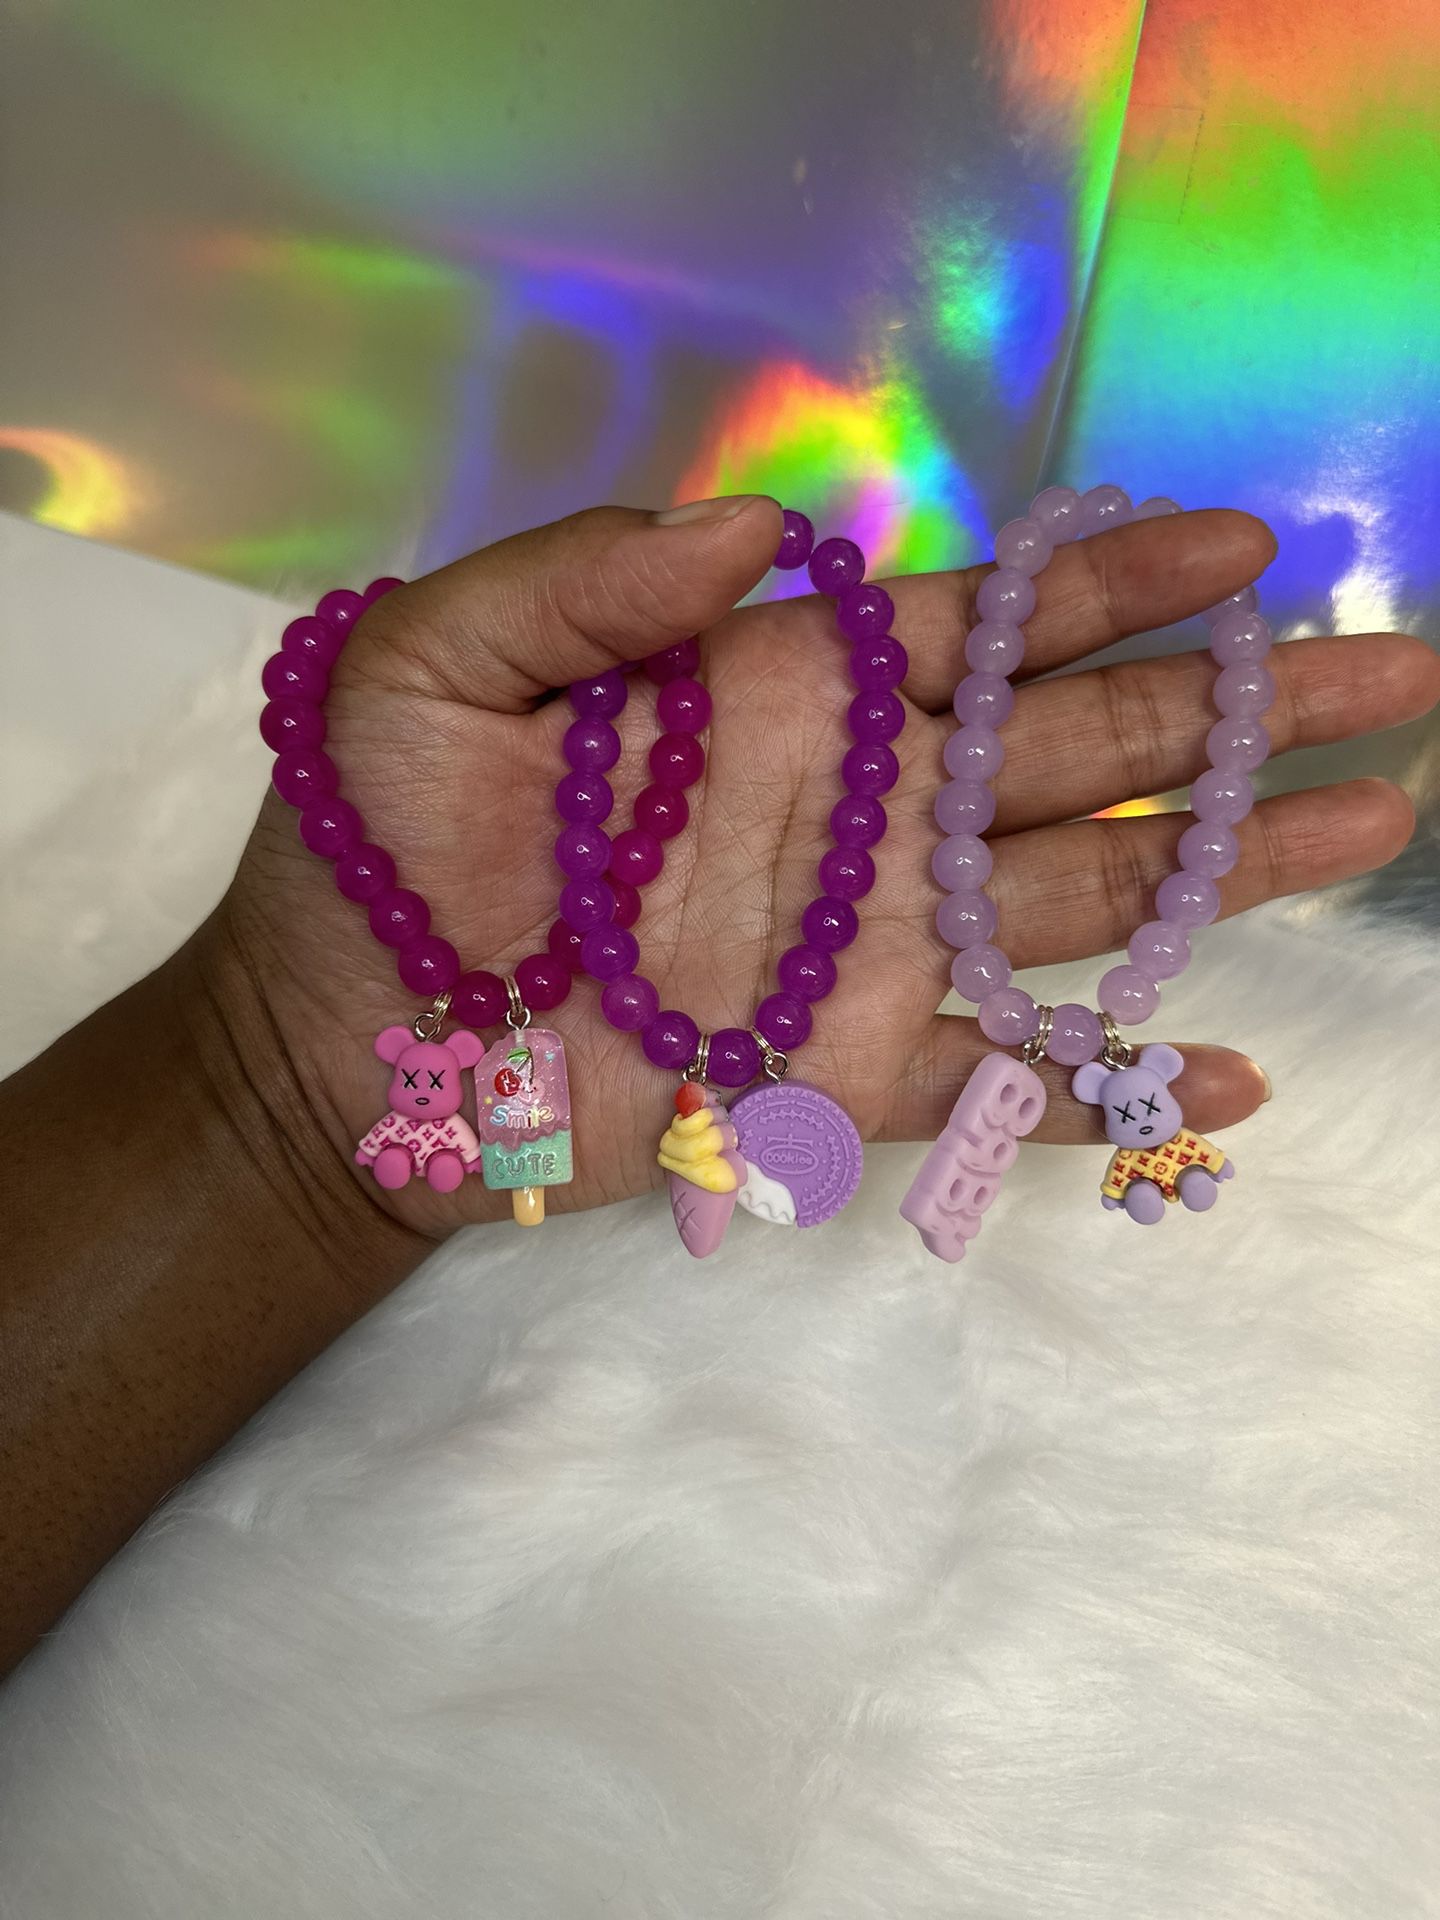 2 Purple Beaded Bracelet With Charms